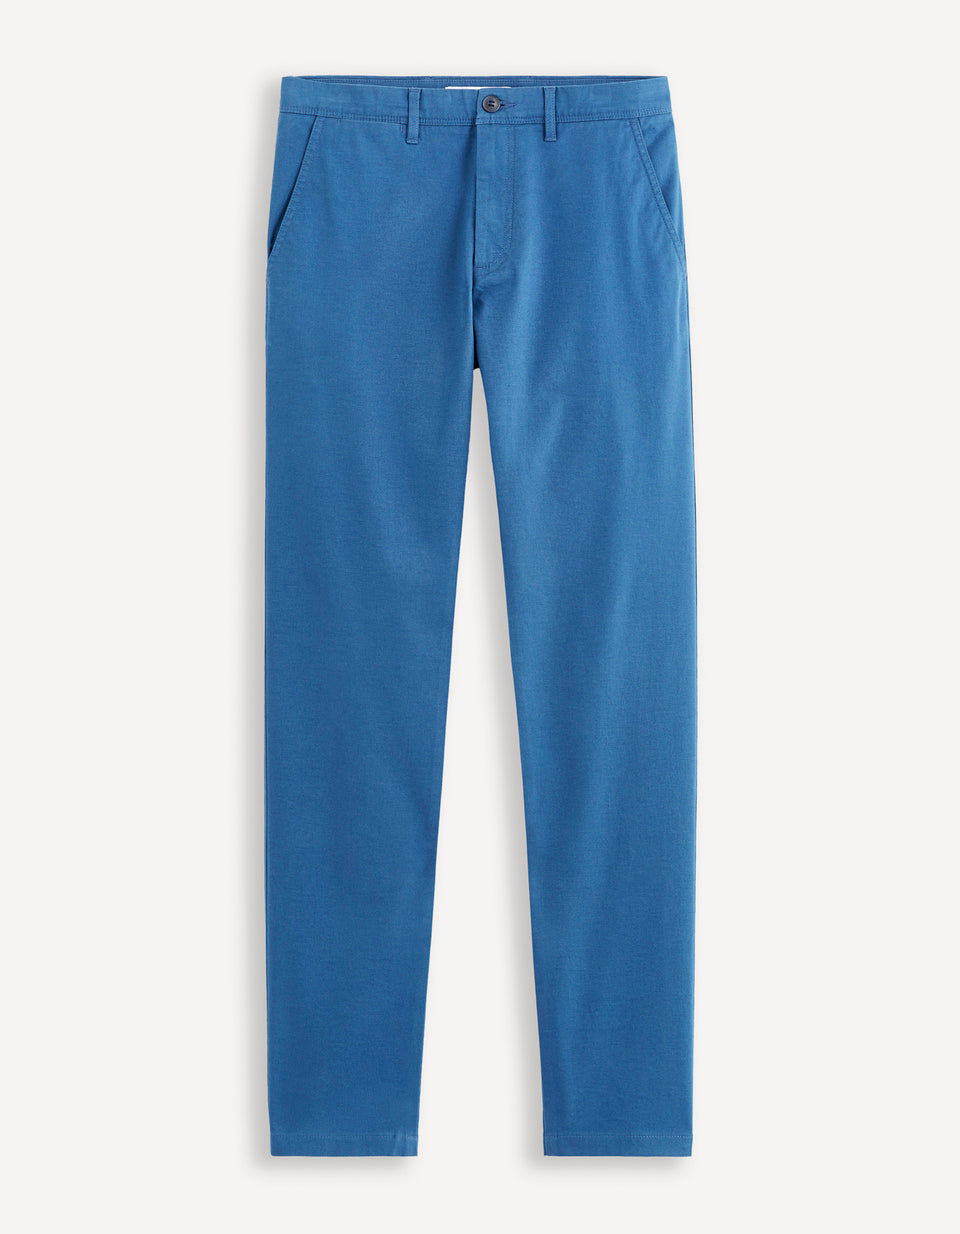 Blue Chino Trousers